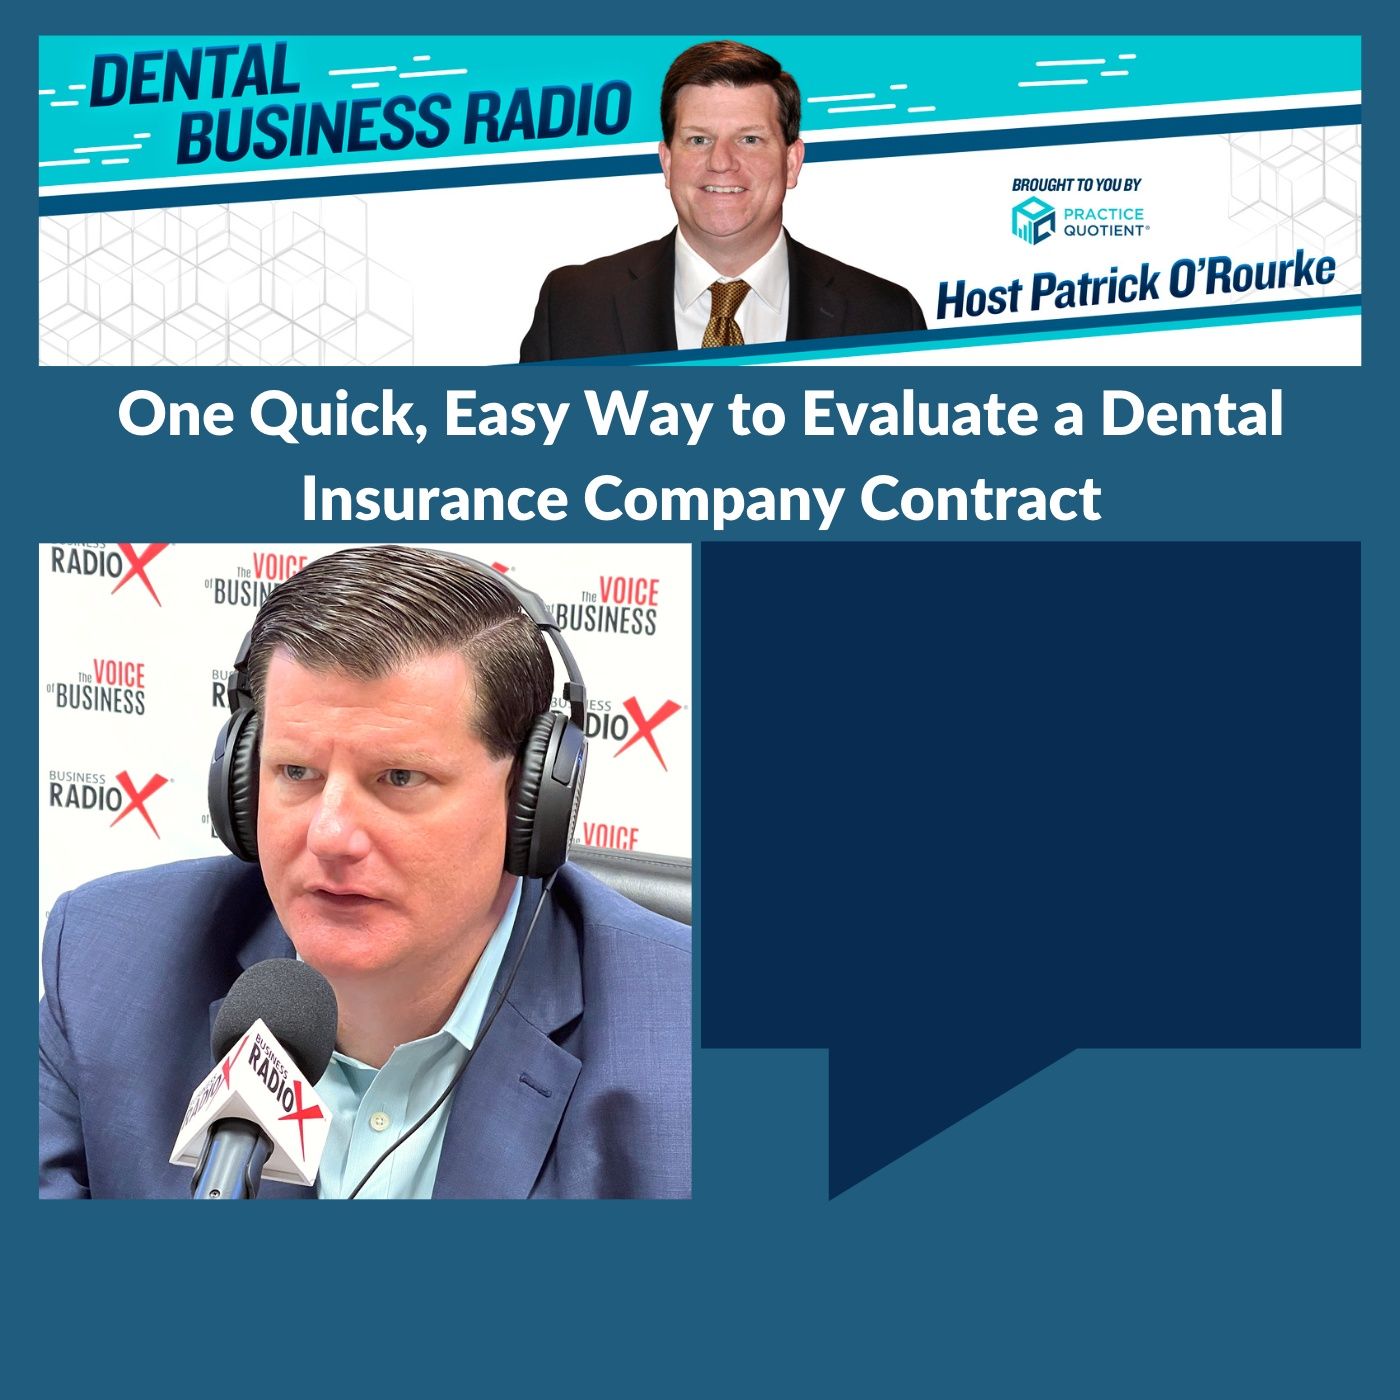 One Quick, Easy Way to Evaluate a Dental Insurance Company Contract, with Patrick O'Rourke, Host of Dental Business Radio